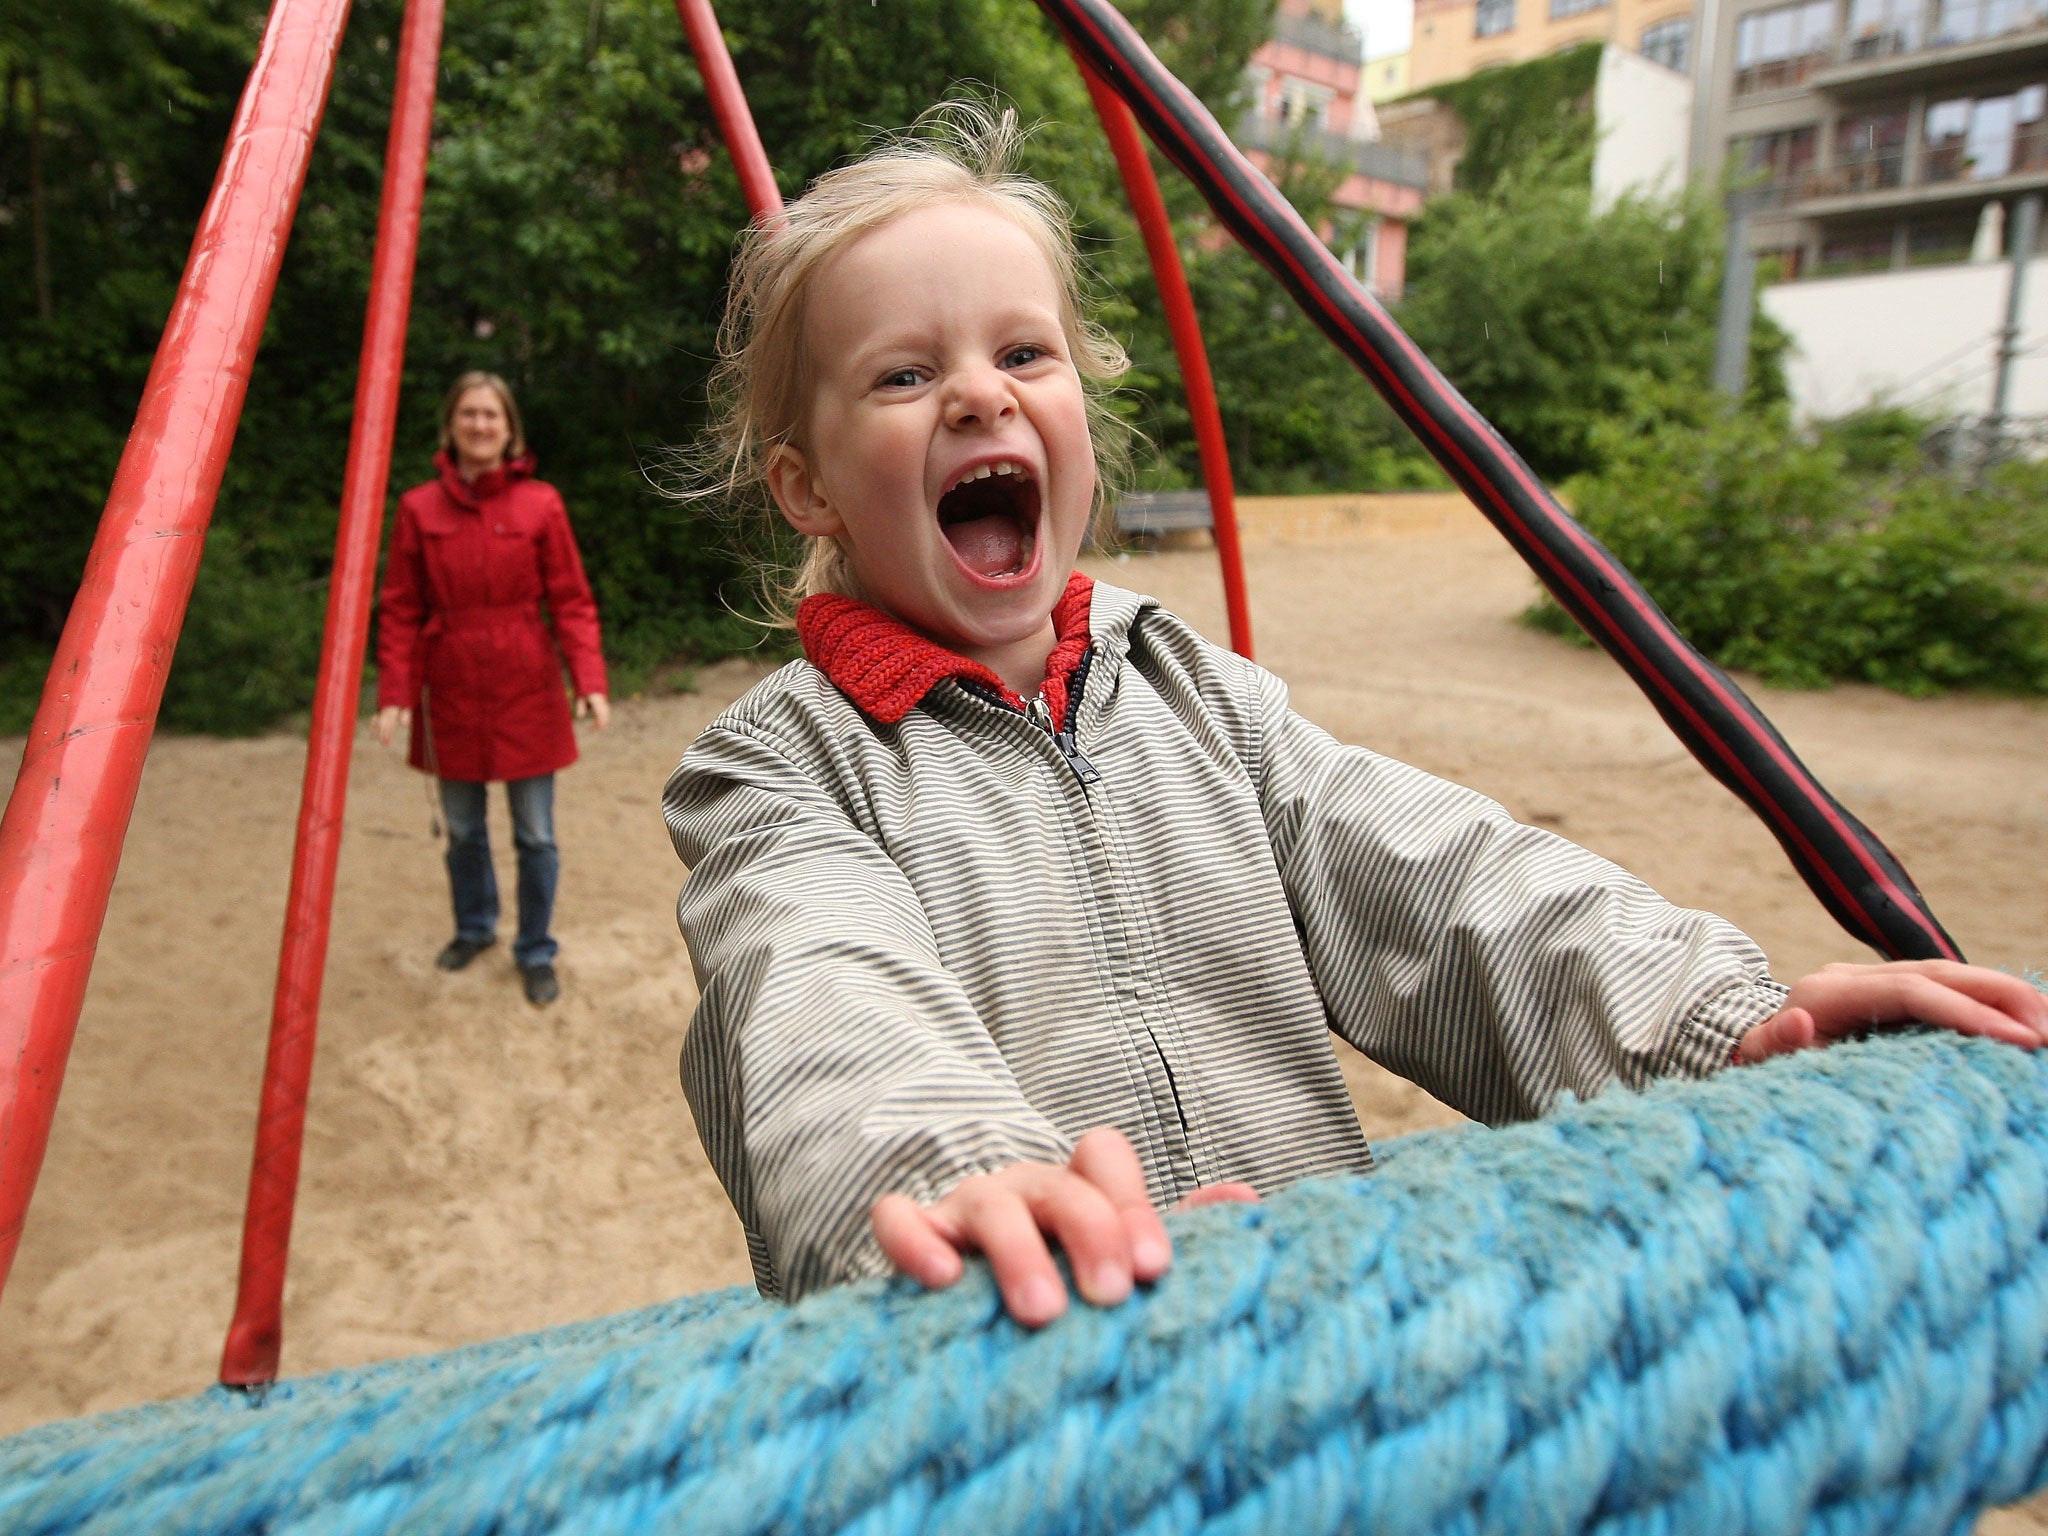 A mother pushes her three-year-old daughter on a swing on a playground on June 6, 2012 in Berlin, Germany. The Betreuungsgeld (child care subsidy), proposed to take effect in January 2013, would give parents that keep their children at home instead of sending them to a kindergarten €150 per child per month, causing concern amongst critics who feel that the state support would foster traditional family values as well as provide an incentive for low-income families to keep their children at home.